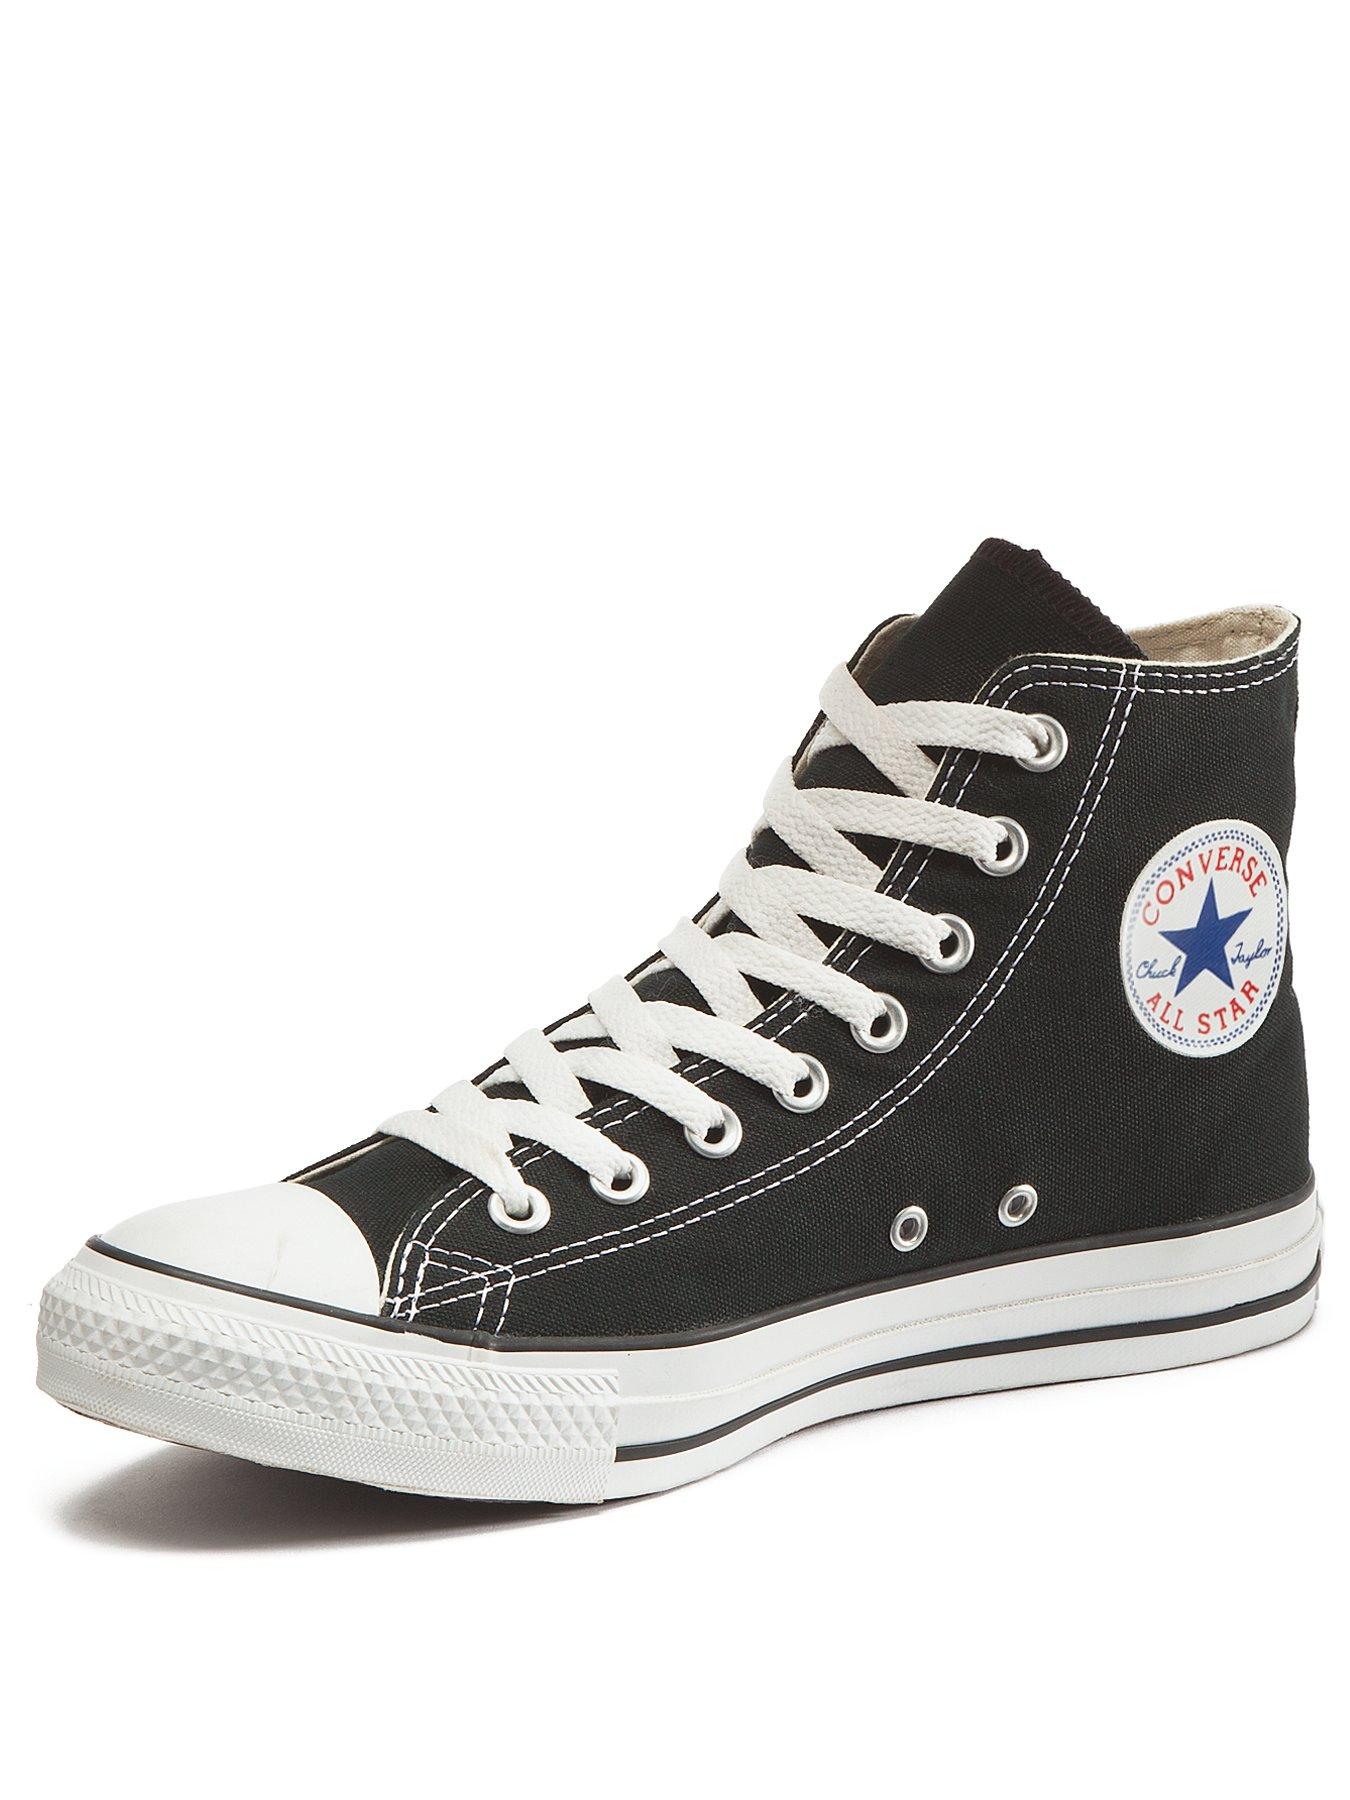 converse trainers womens black